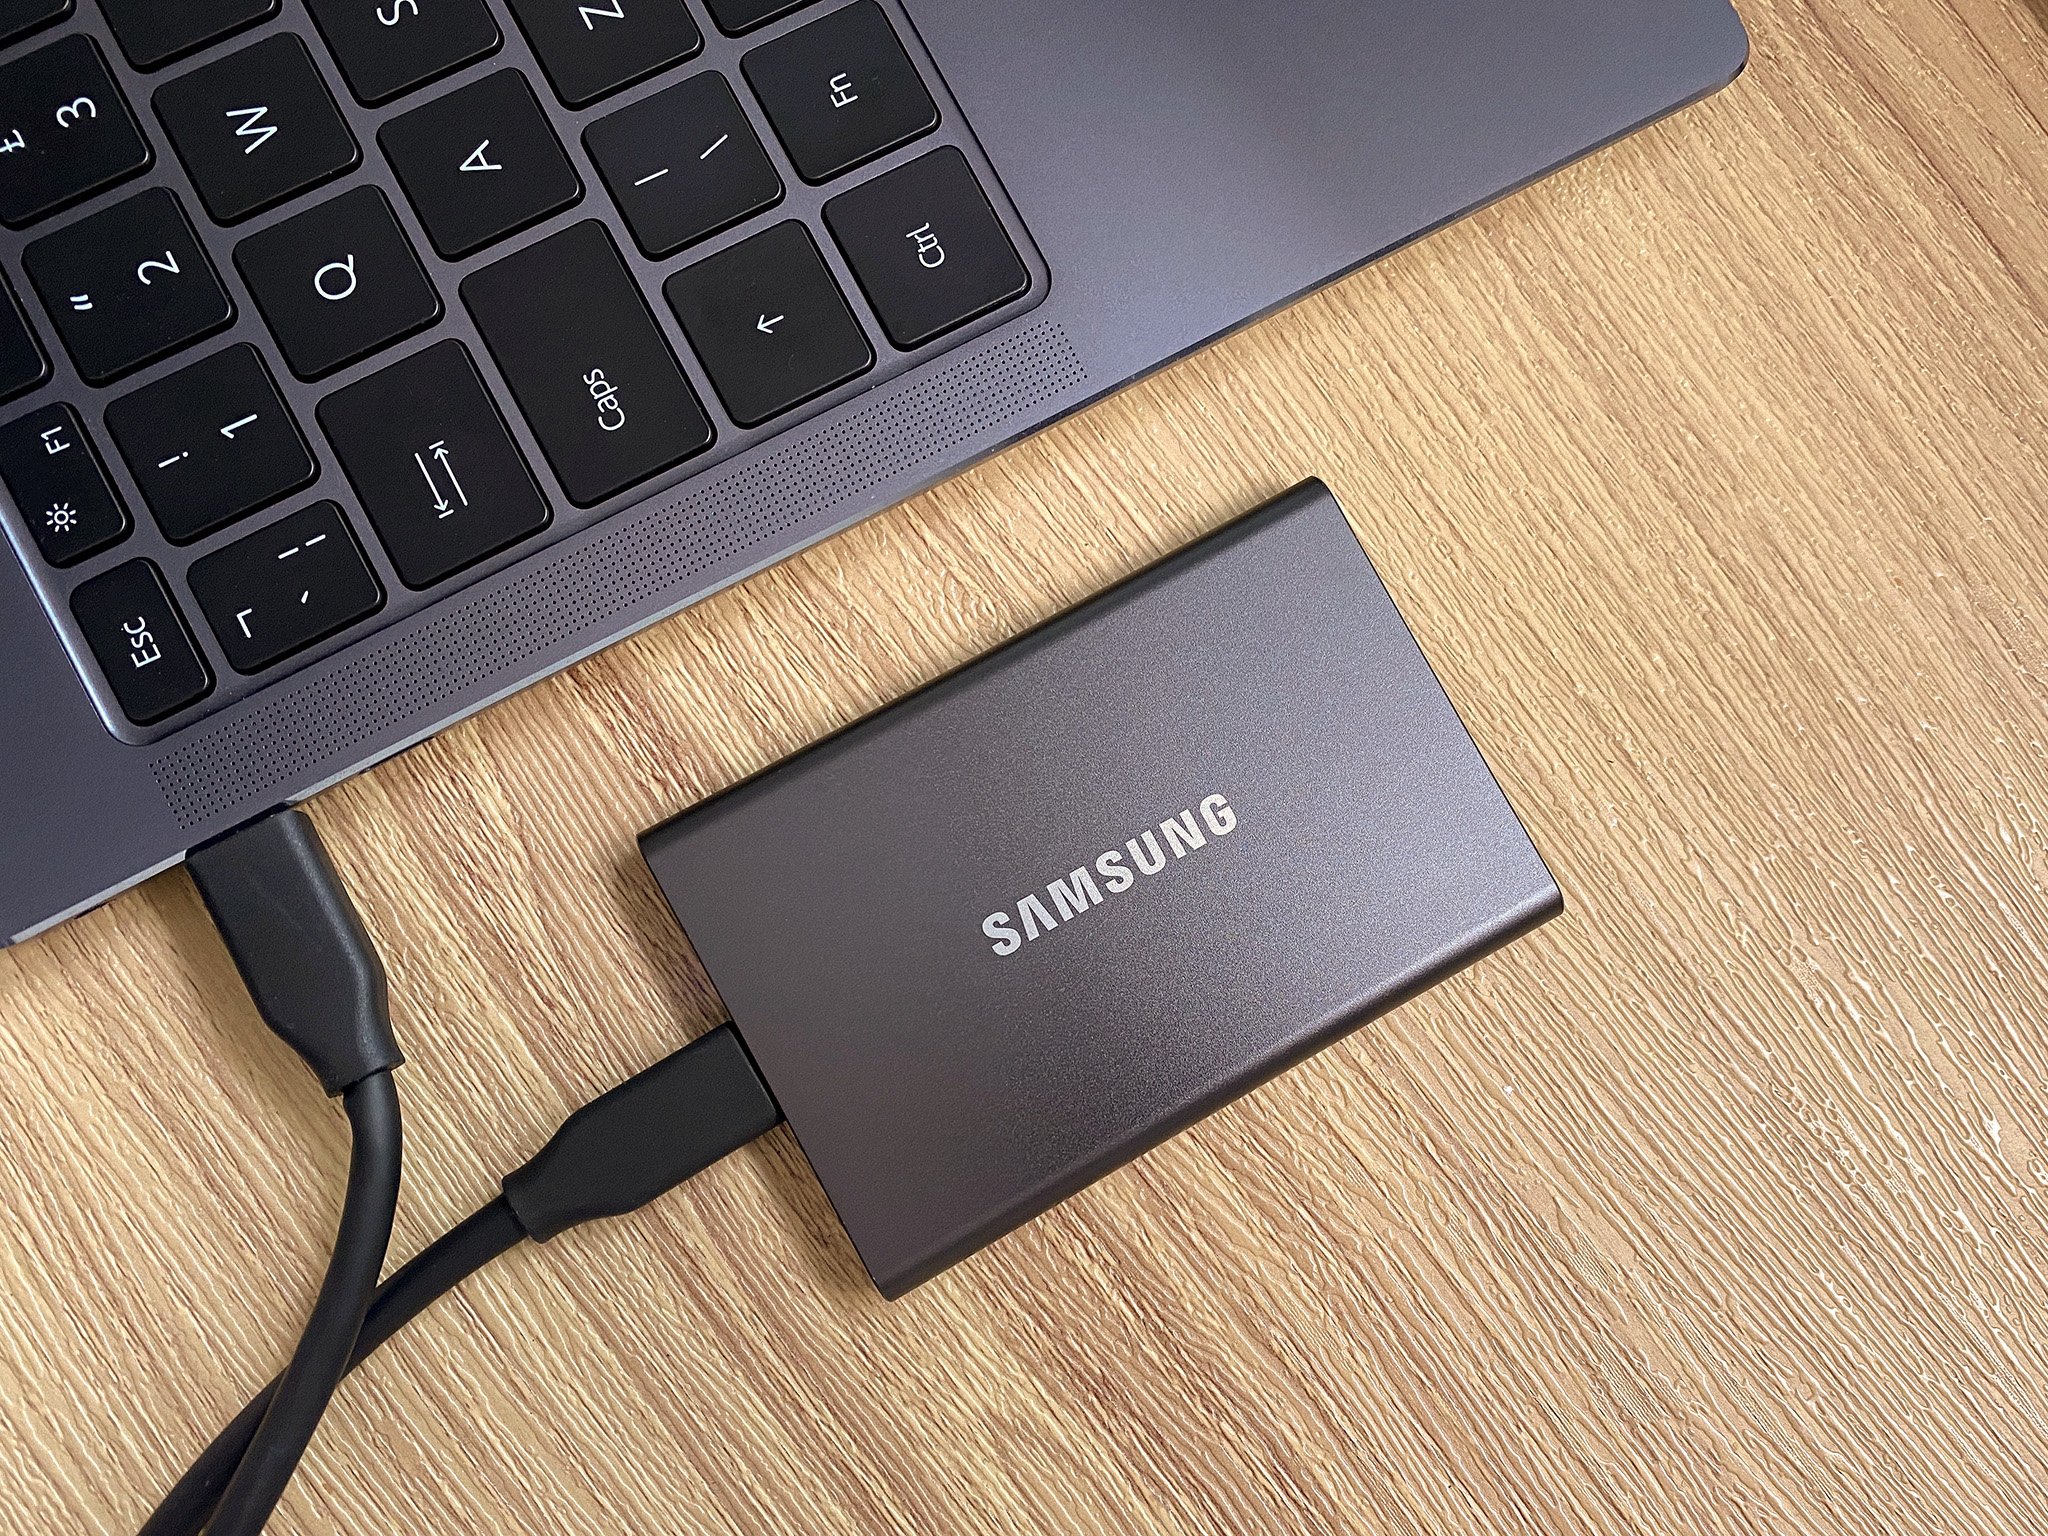 Samsung Portable SSD T7 Review